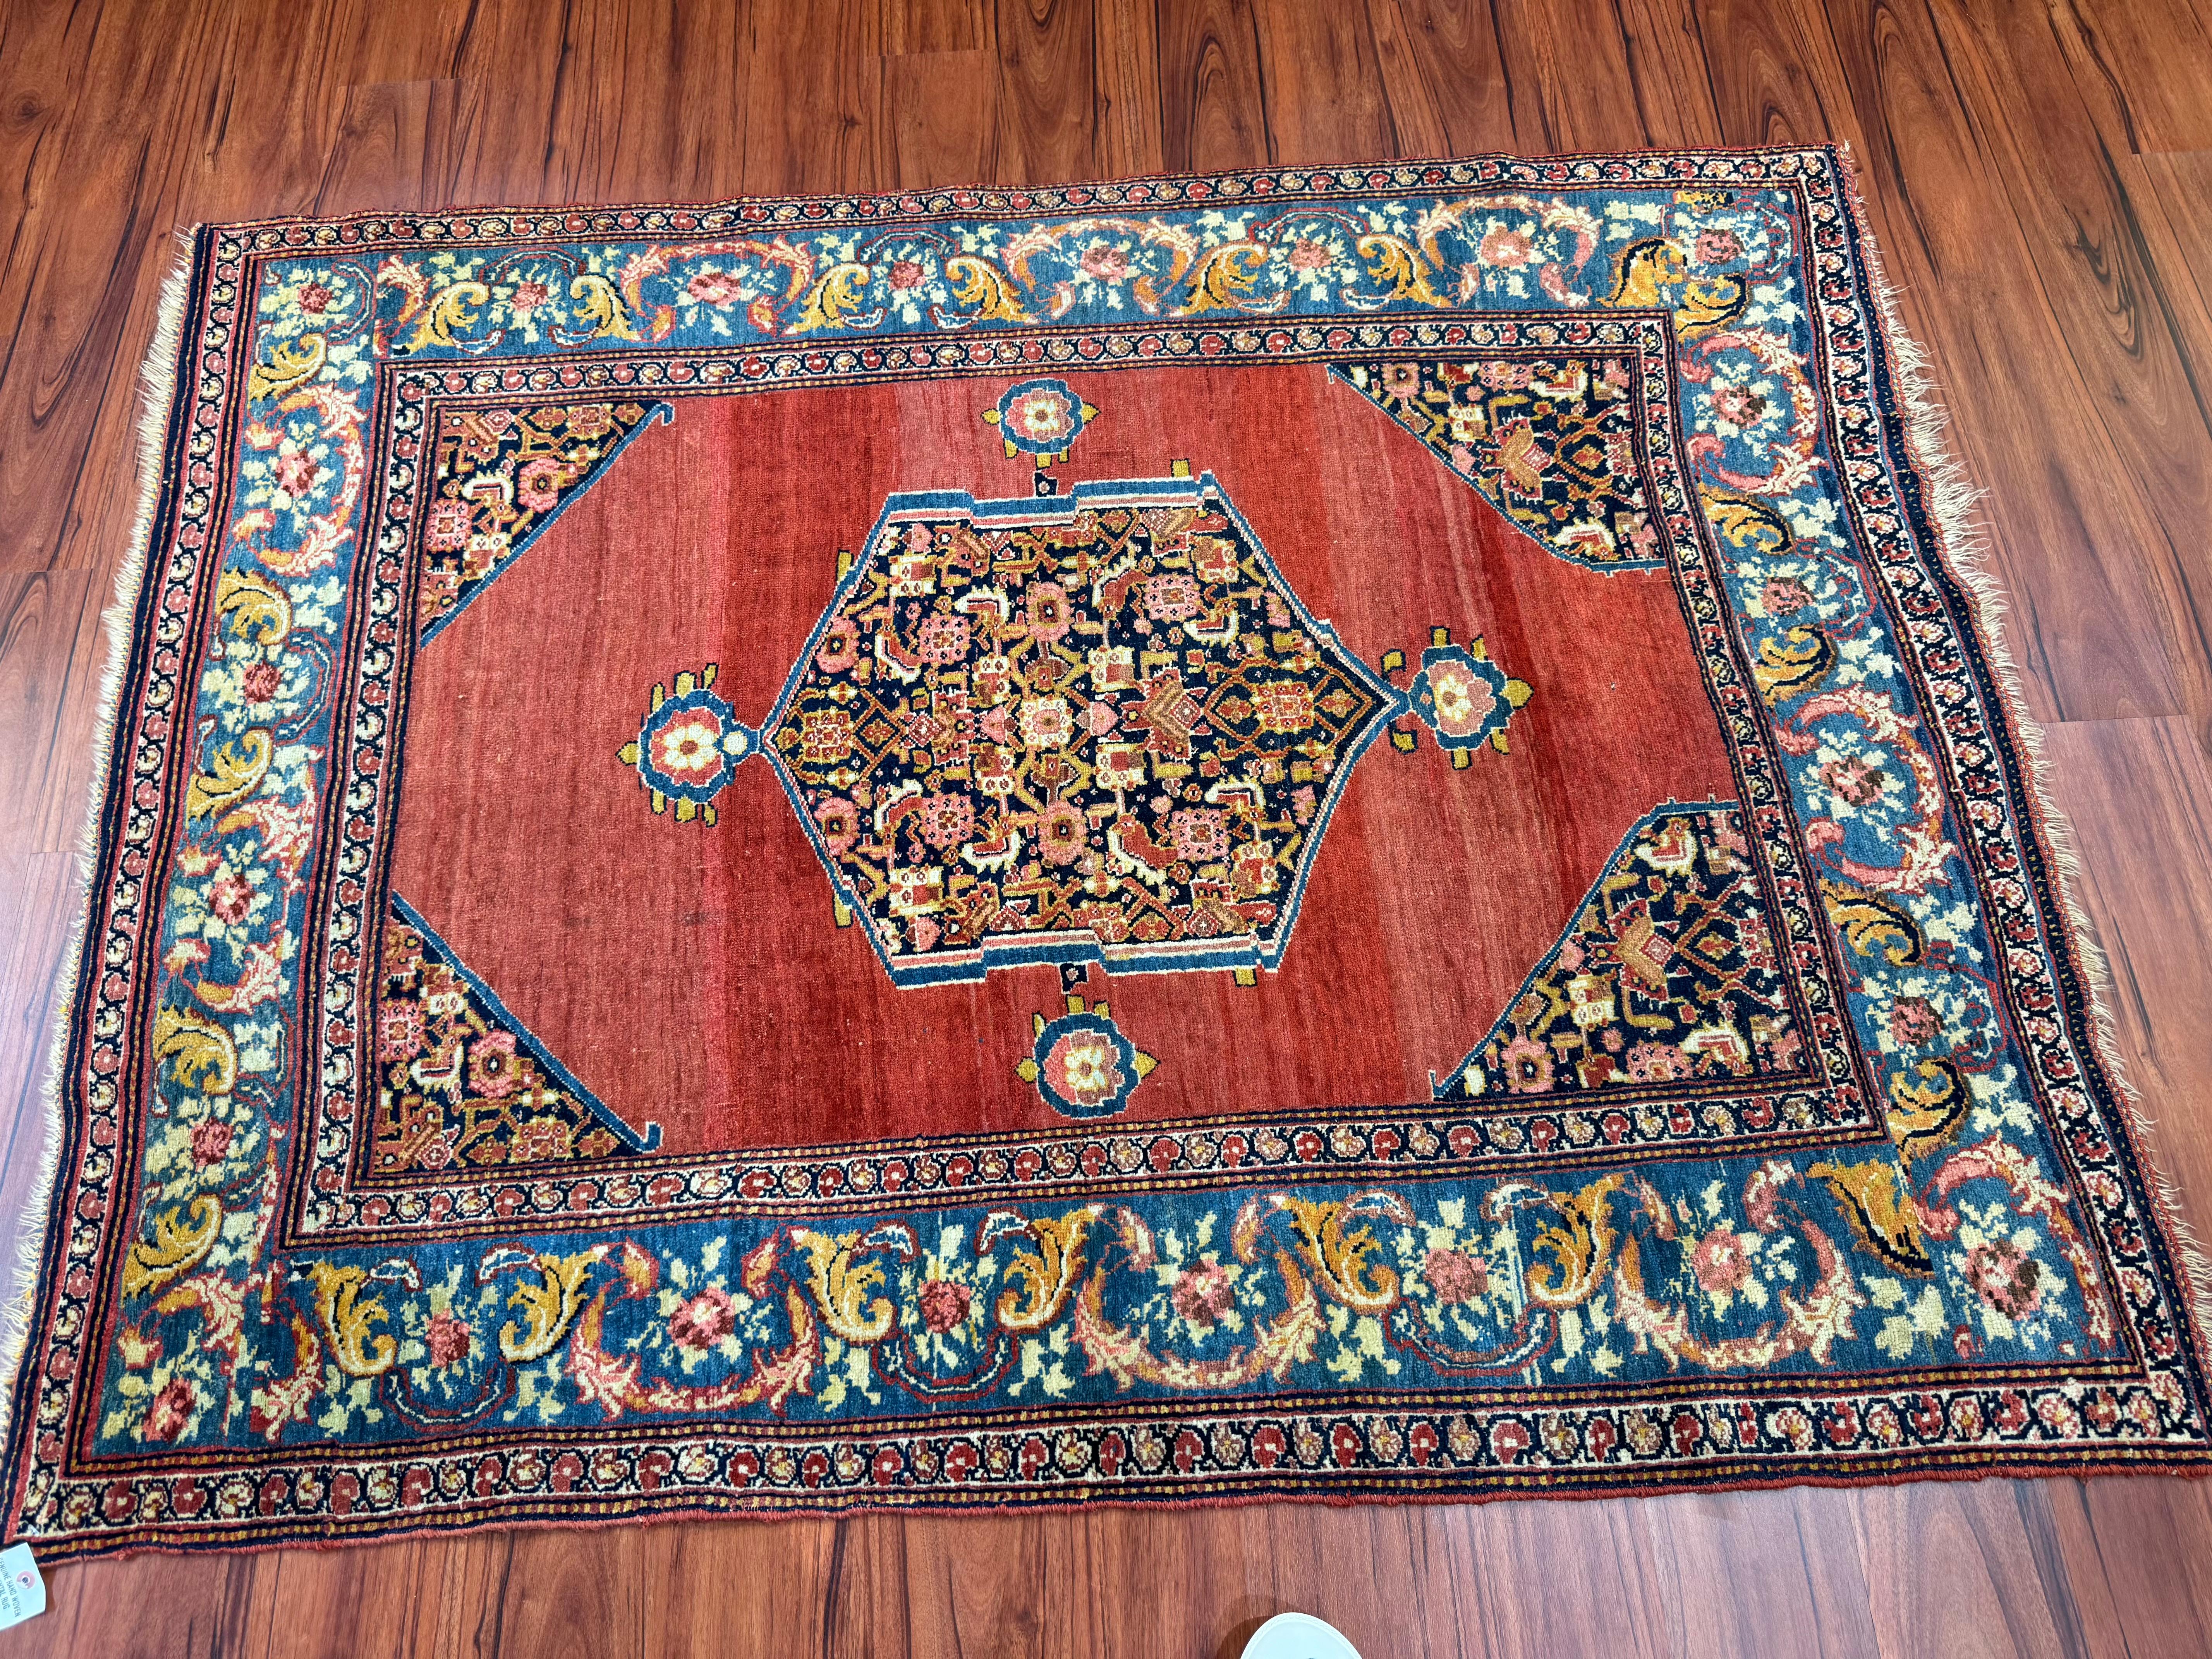 A stunning antique Persian Bijar Rug that originates from Iran in the late 19th century. This rug is in excellent condition considering its rich history and has beautiful red colors all over. Feel free to message me in regards to this listing or any